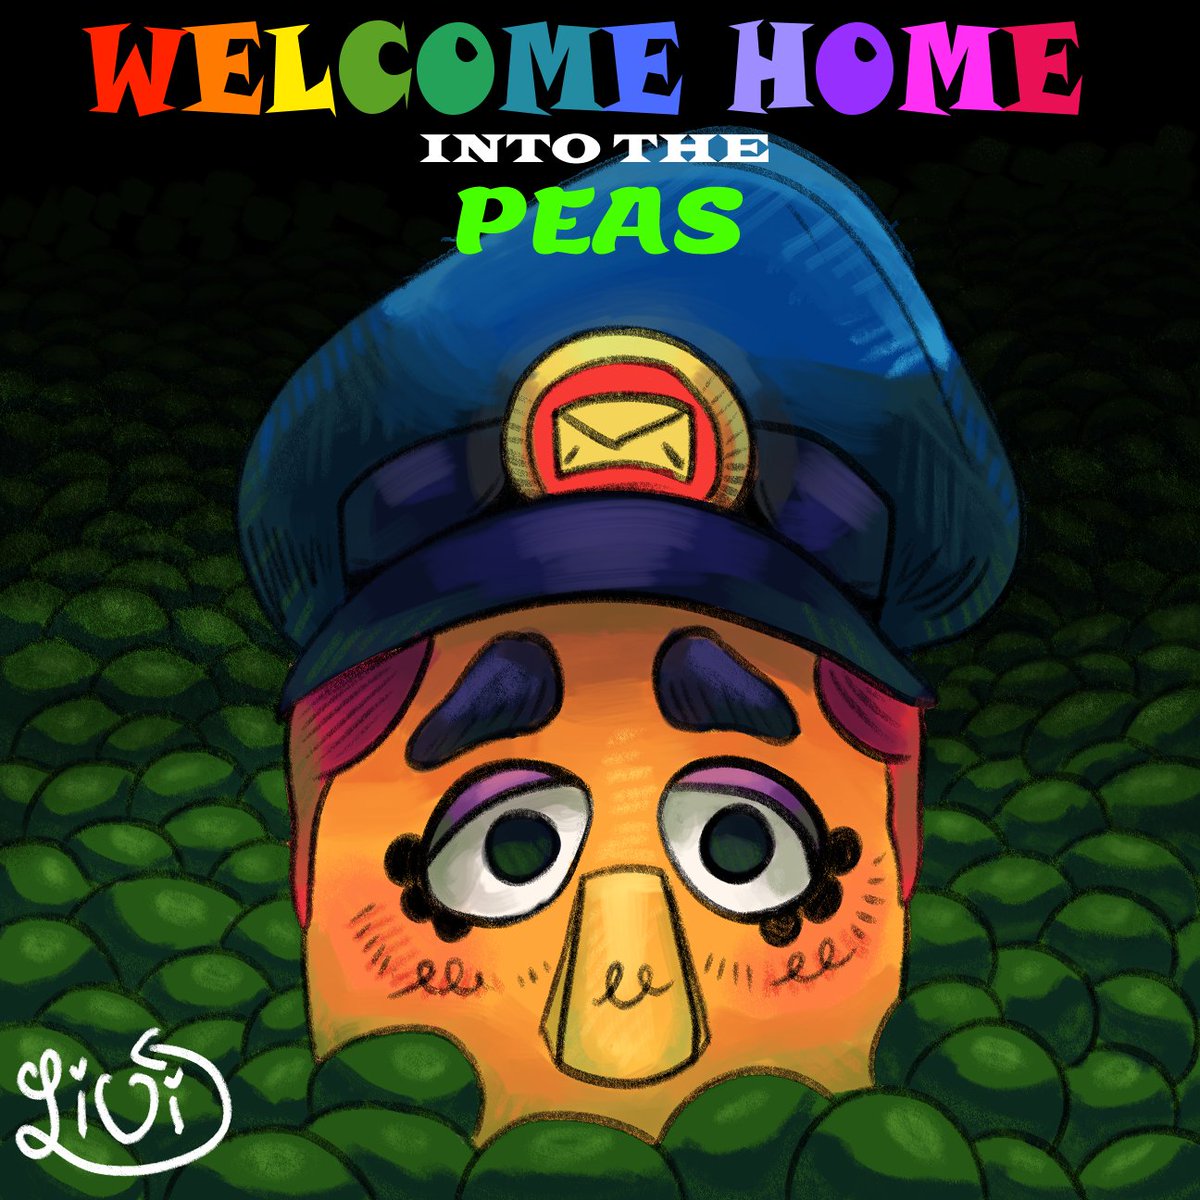 Into the Peas (TIMELAPSE IN DESCRIPTION) #WelcomeHome #welcomehomefanart #EddieDear #Intothepit